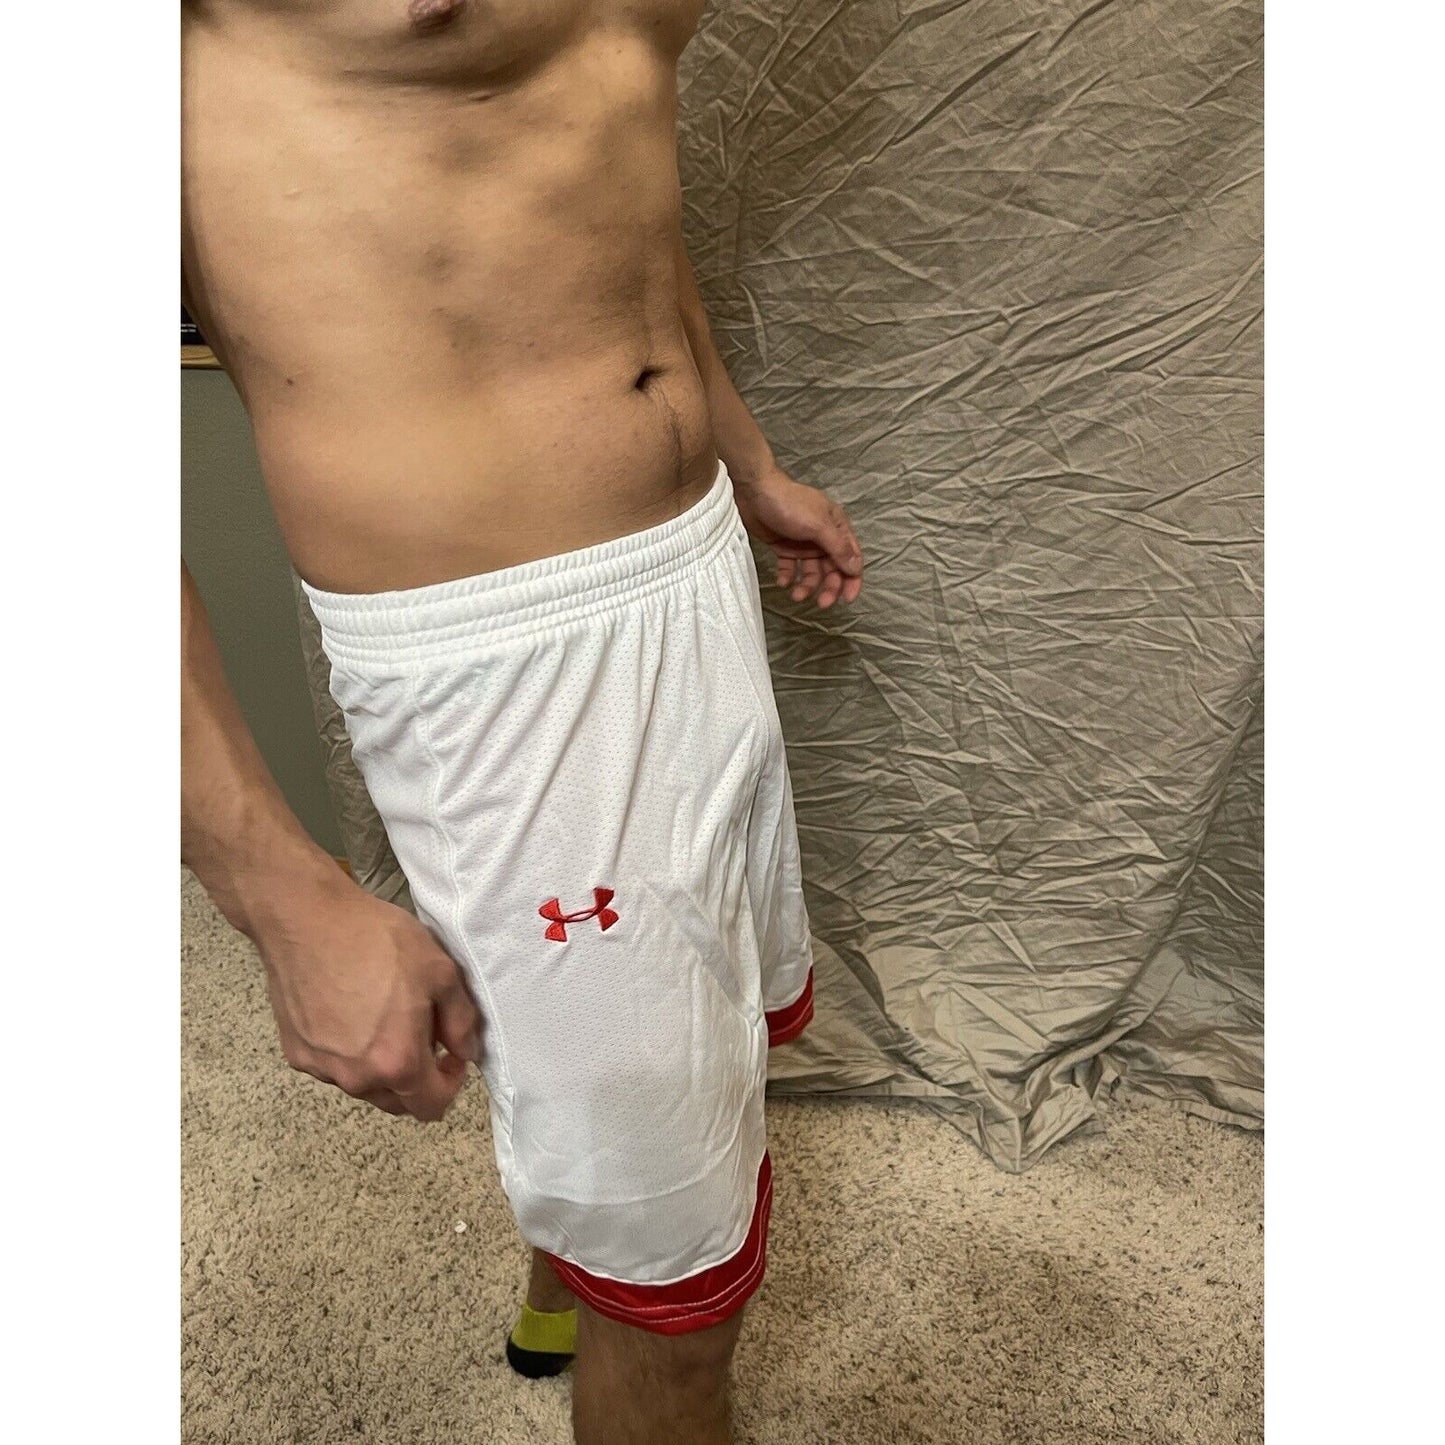 Boy's under armour Youth Large white and Red Lacrosse style shorts no pockets